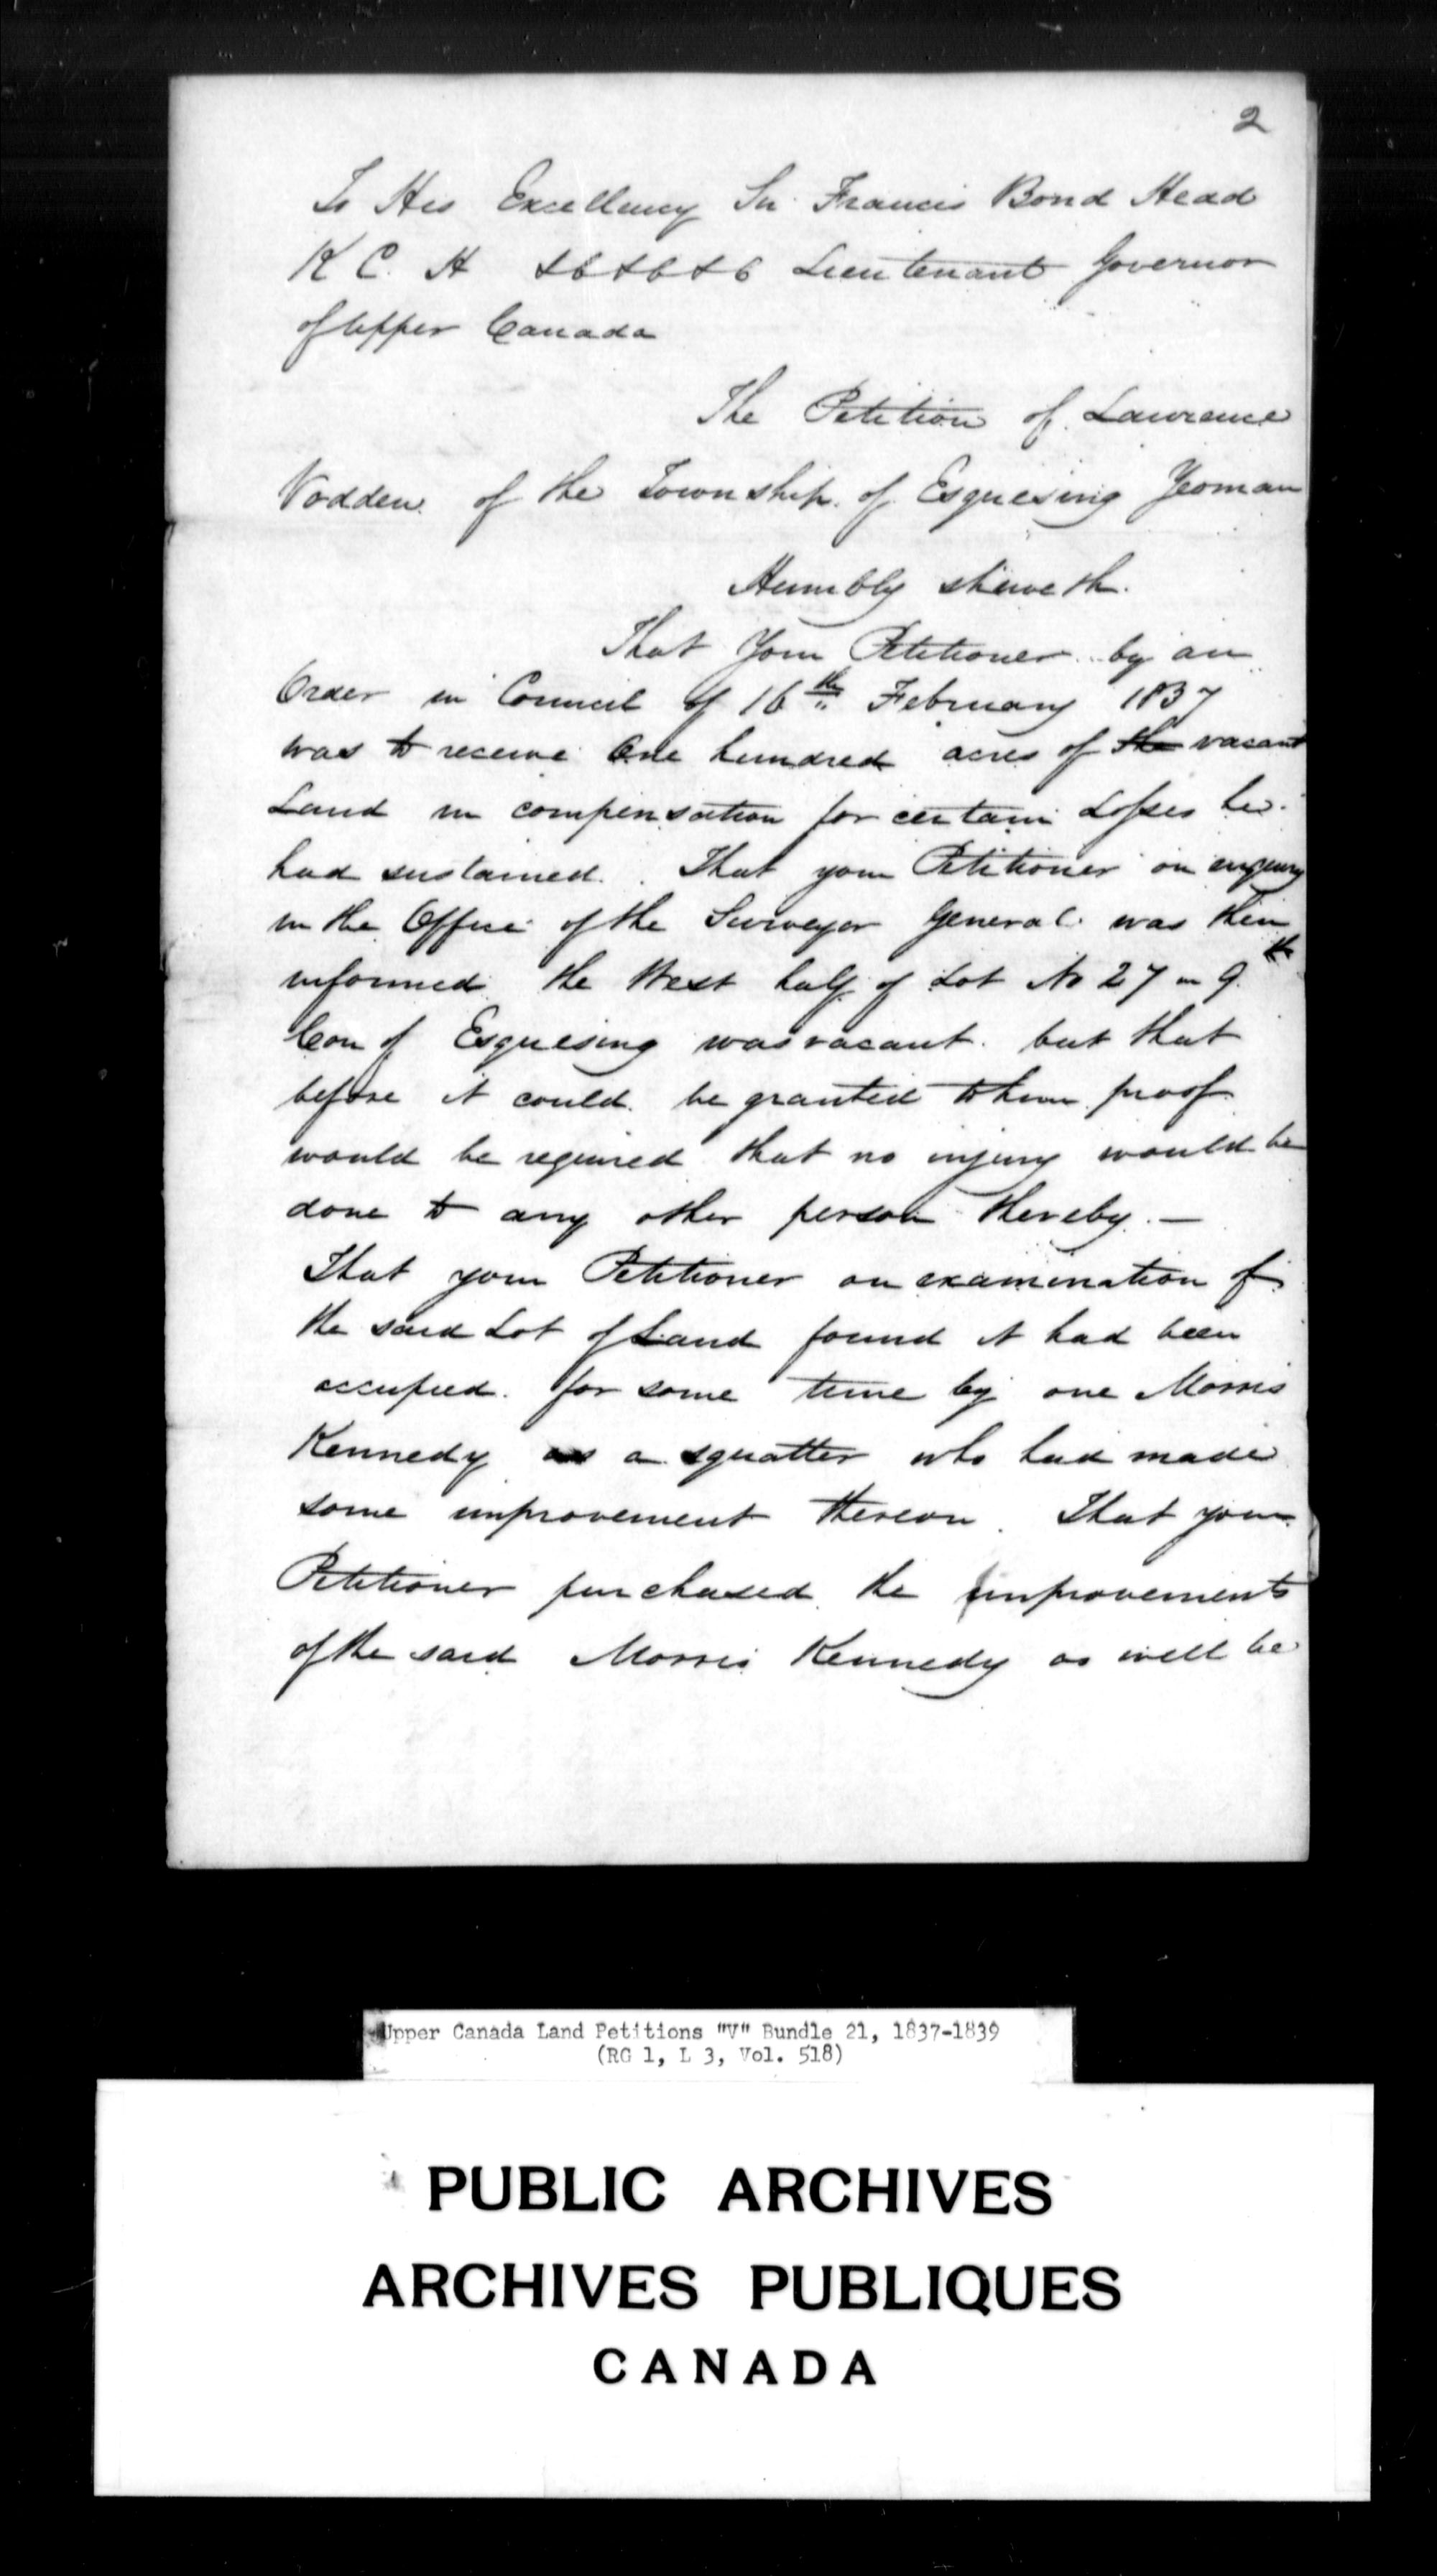 Title: Upper Canada Land Petitions (1763-1865) - Mikan Number: 205131 - Microform: c-2948